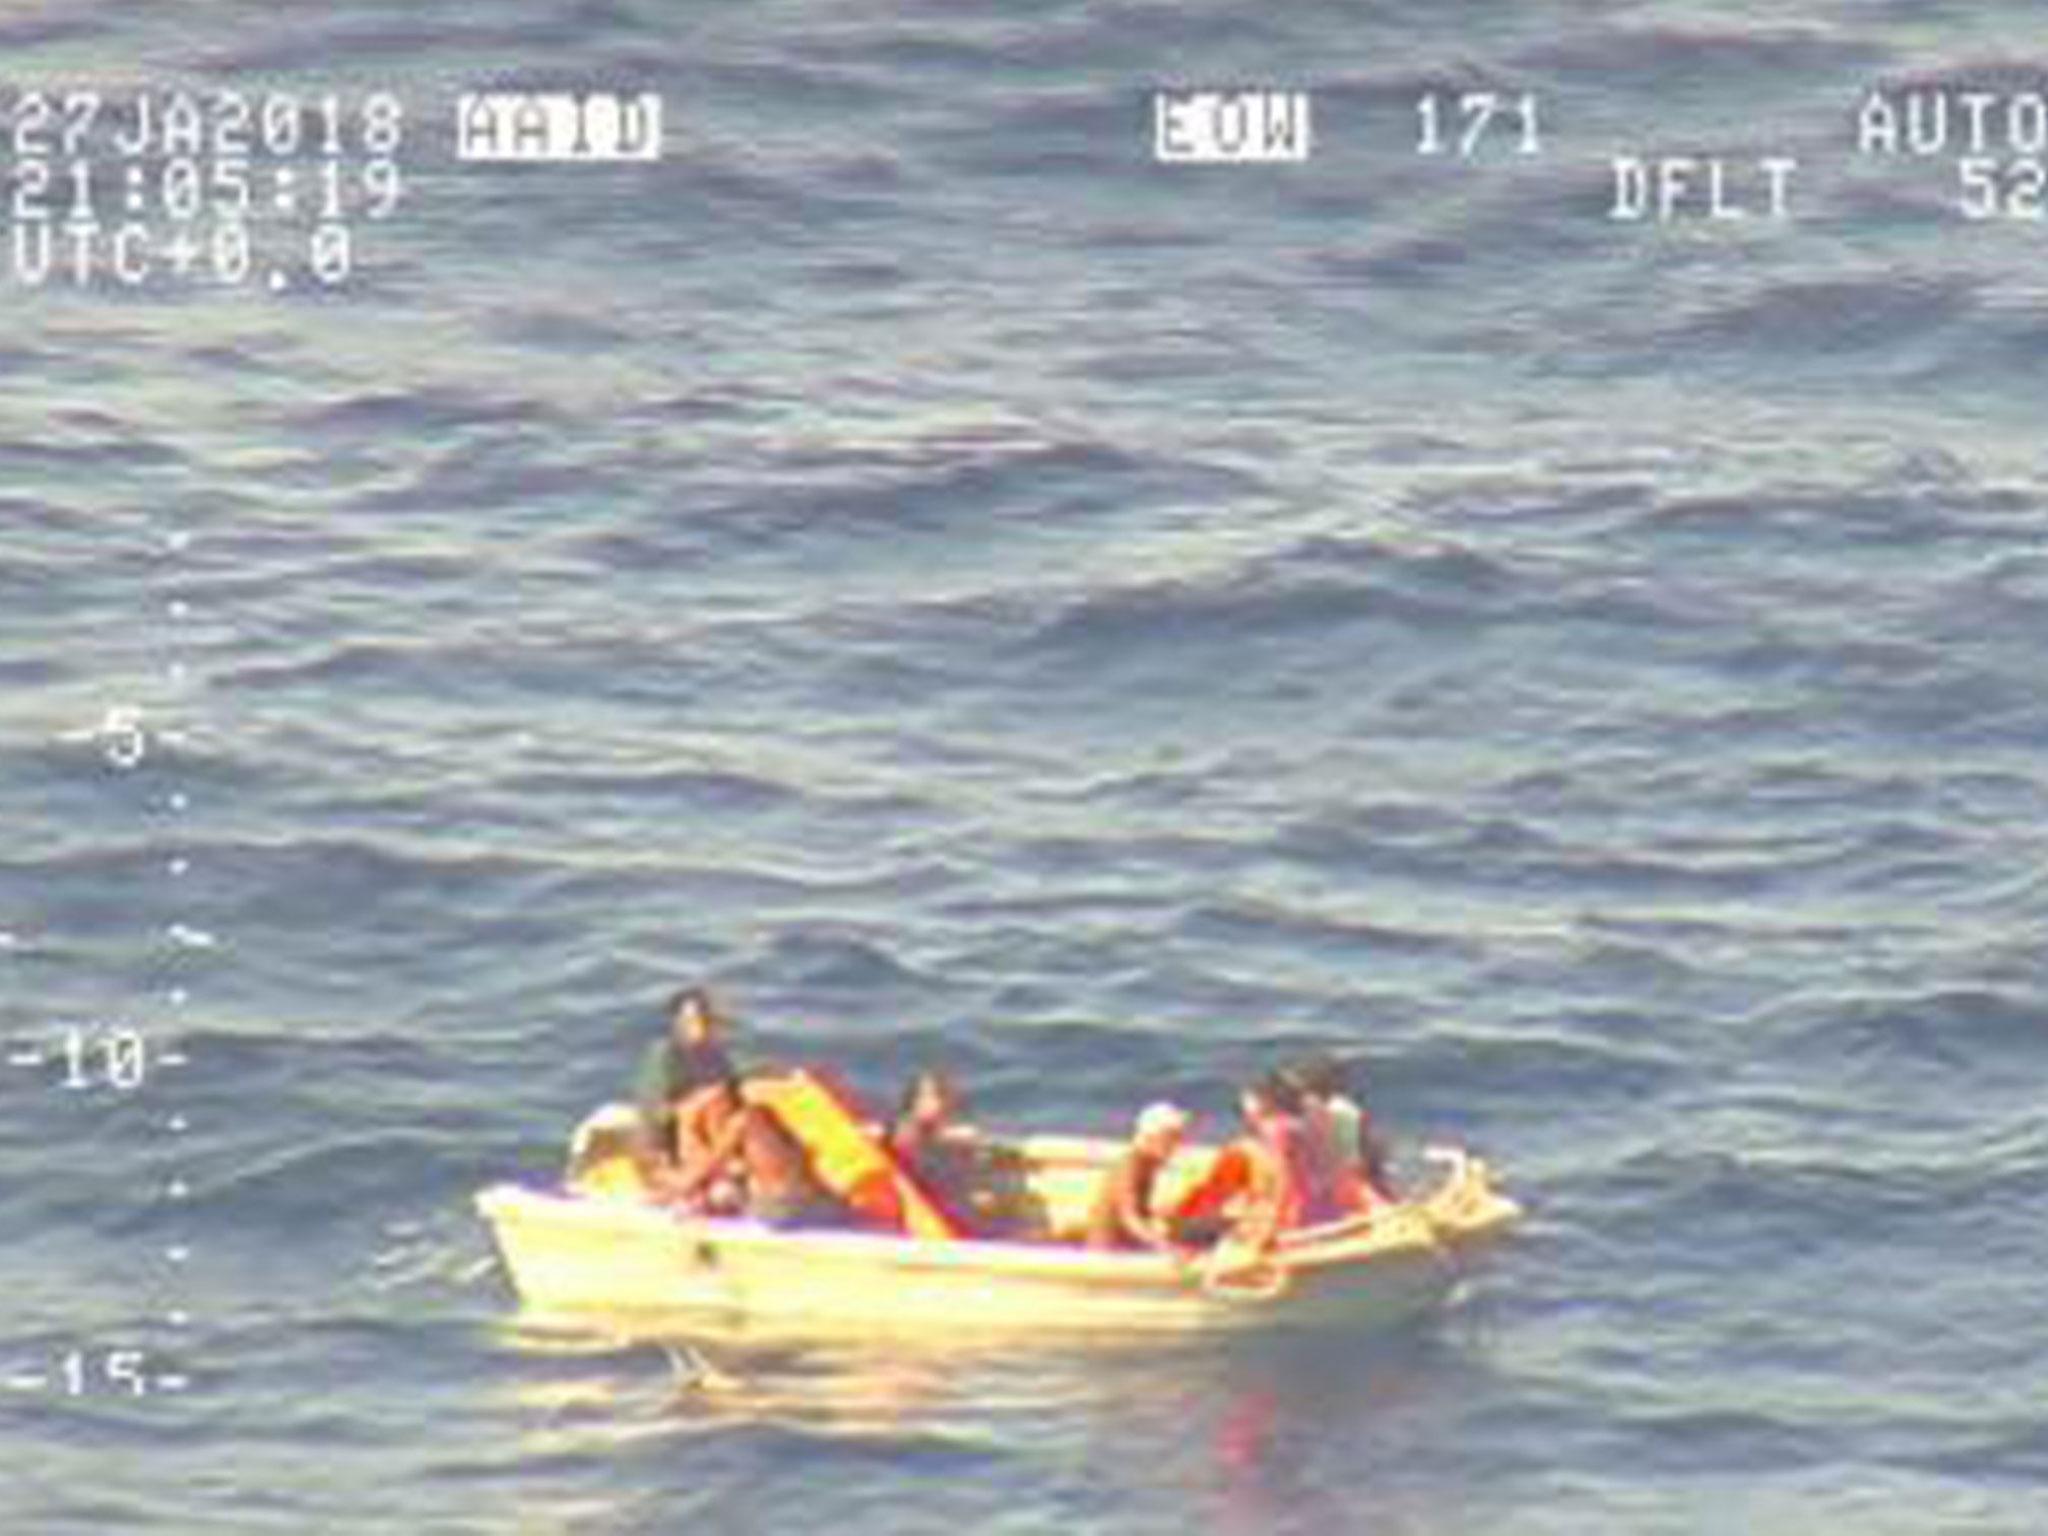 The seven survivors had been adrift in the Pacific OCean on a five-metre dinghy after drifting for four days